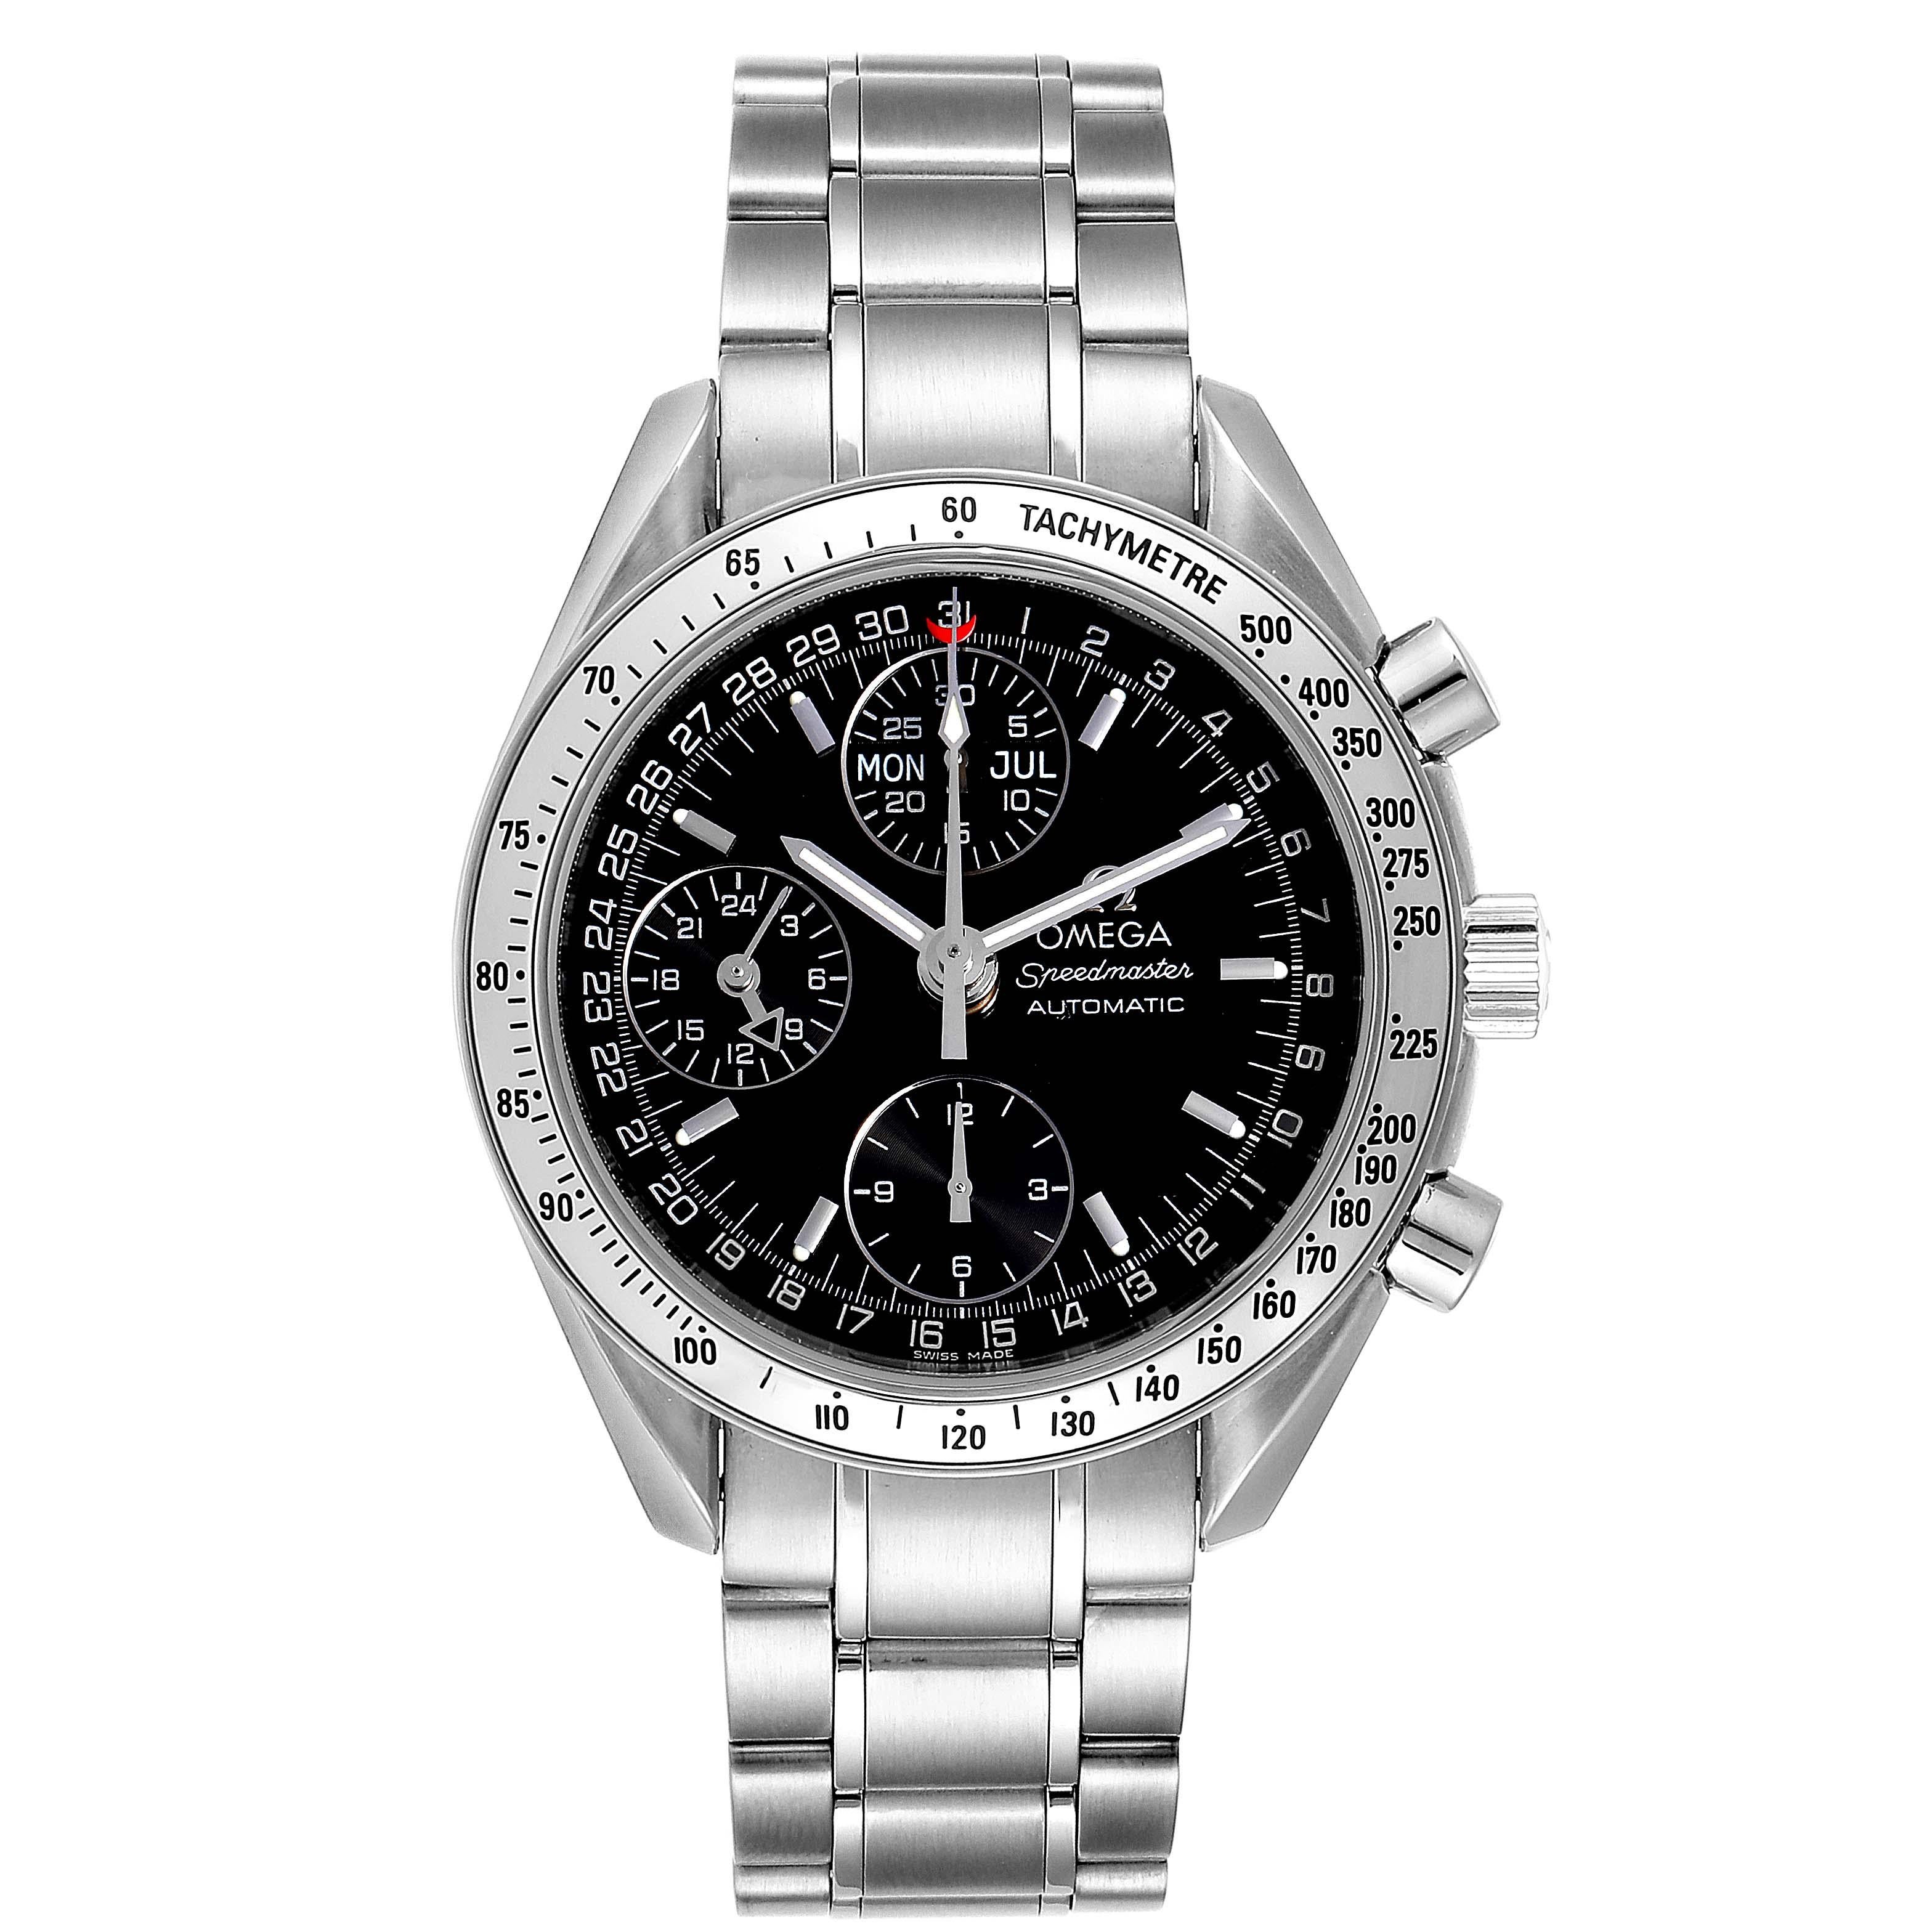 Omega Speedmaster Triple Calendar Black Dial Steel Mens Watch 3523.50.00. Automatic self-winding chronograph movement. Day, date and month indications. Stainless steel round case 39.0 mm in diameter. Case back stamped with the Omega Hippocampus